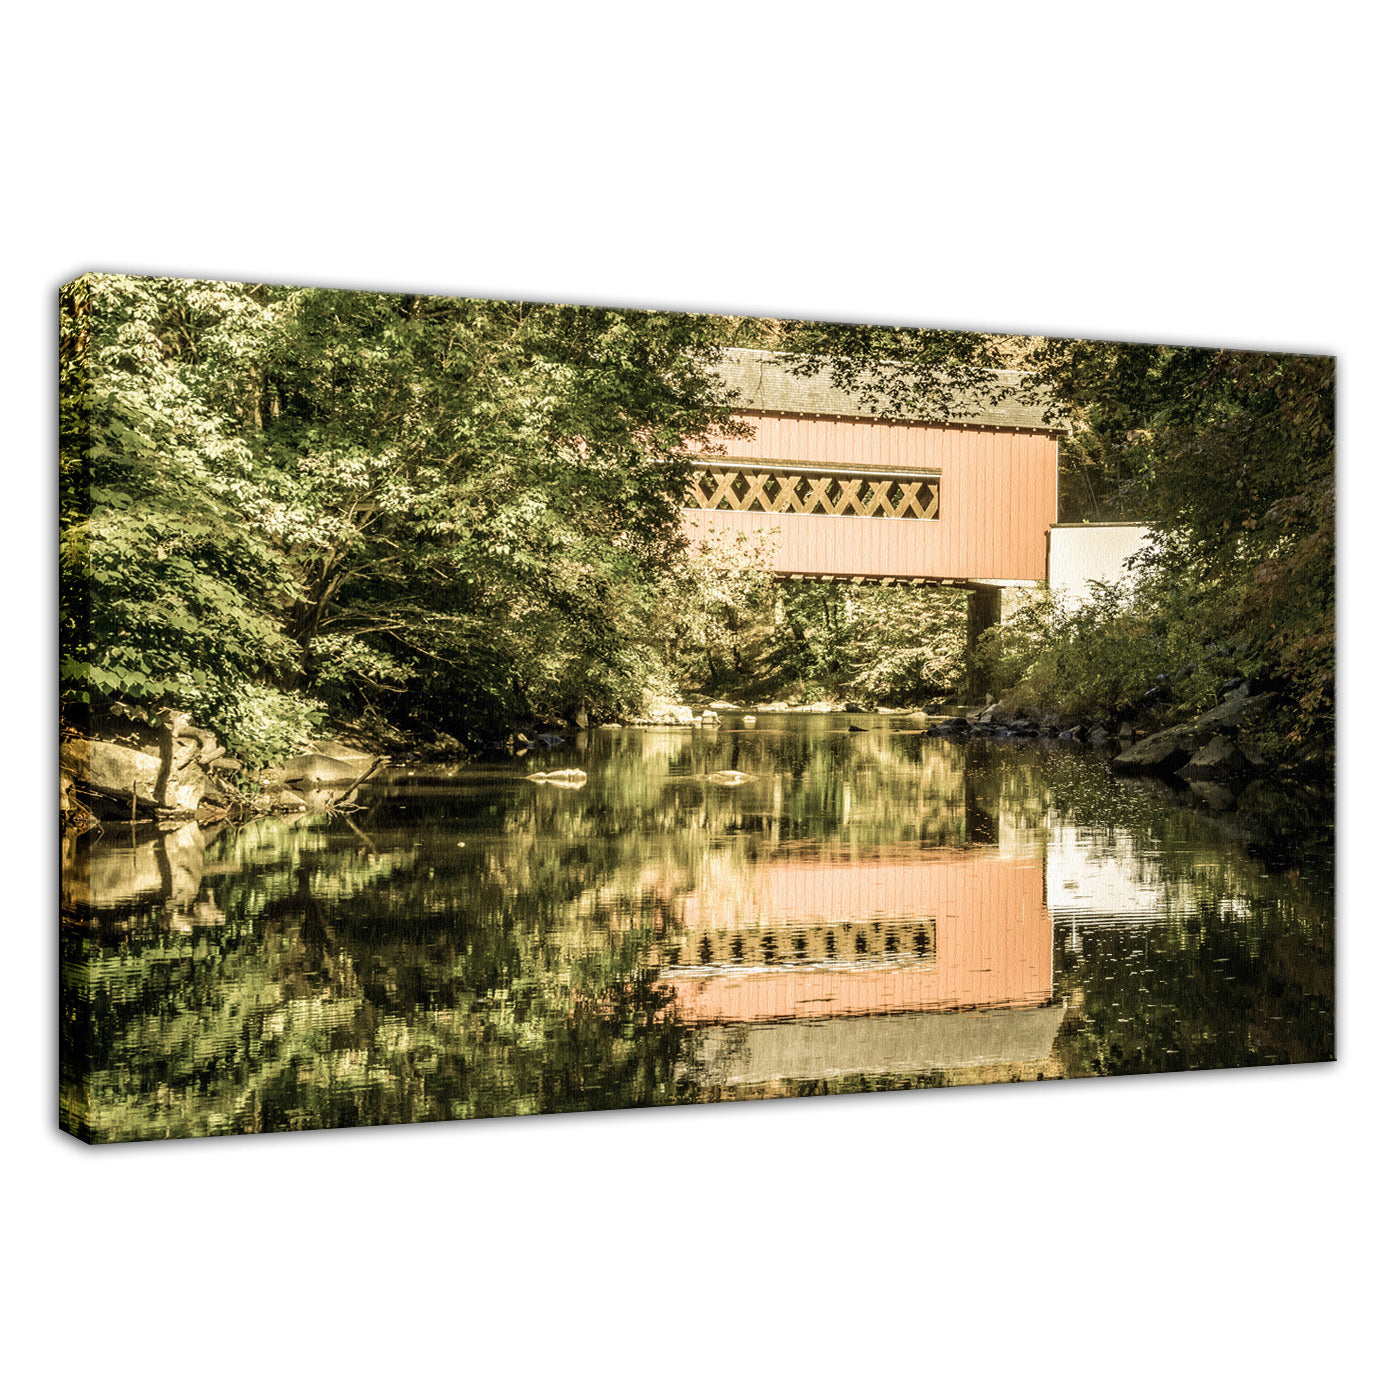 The Reflections of Wooddale Covered Bridge Aged Fine Art Canvas Wall Art Prints  - PIPAFINEART